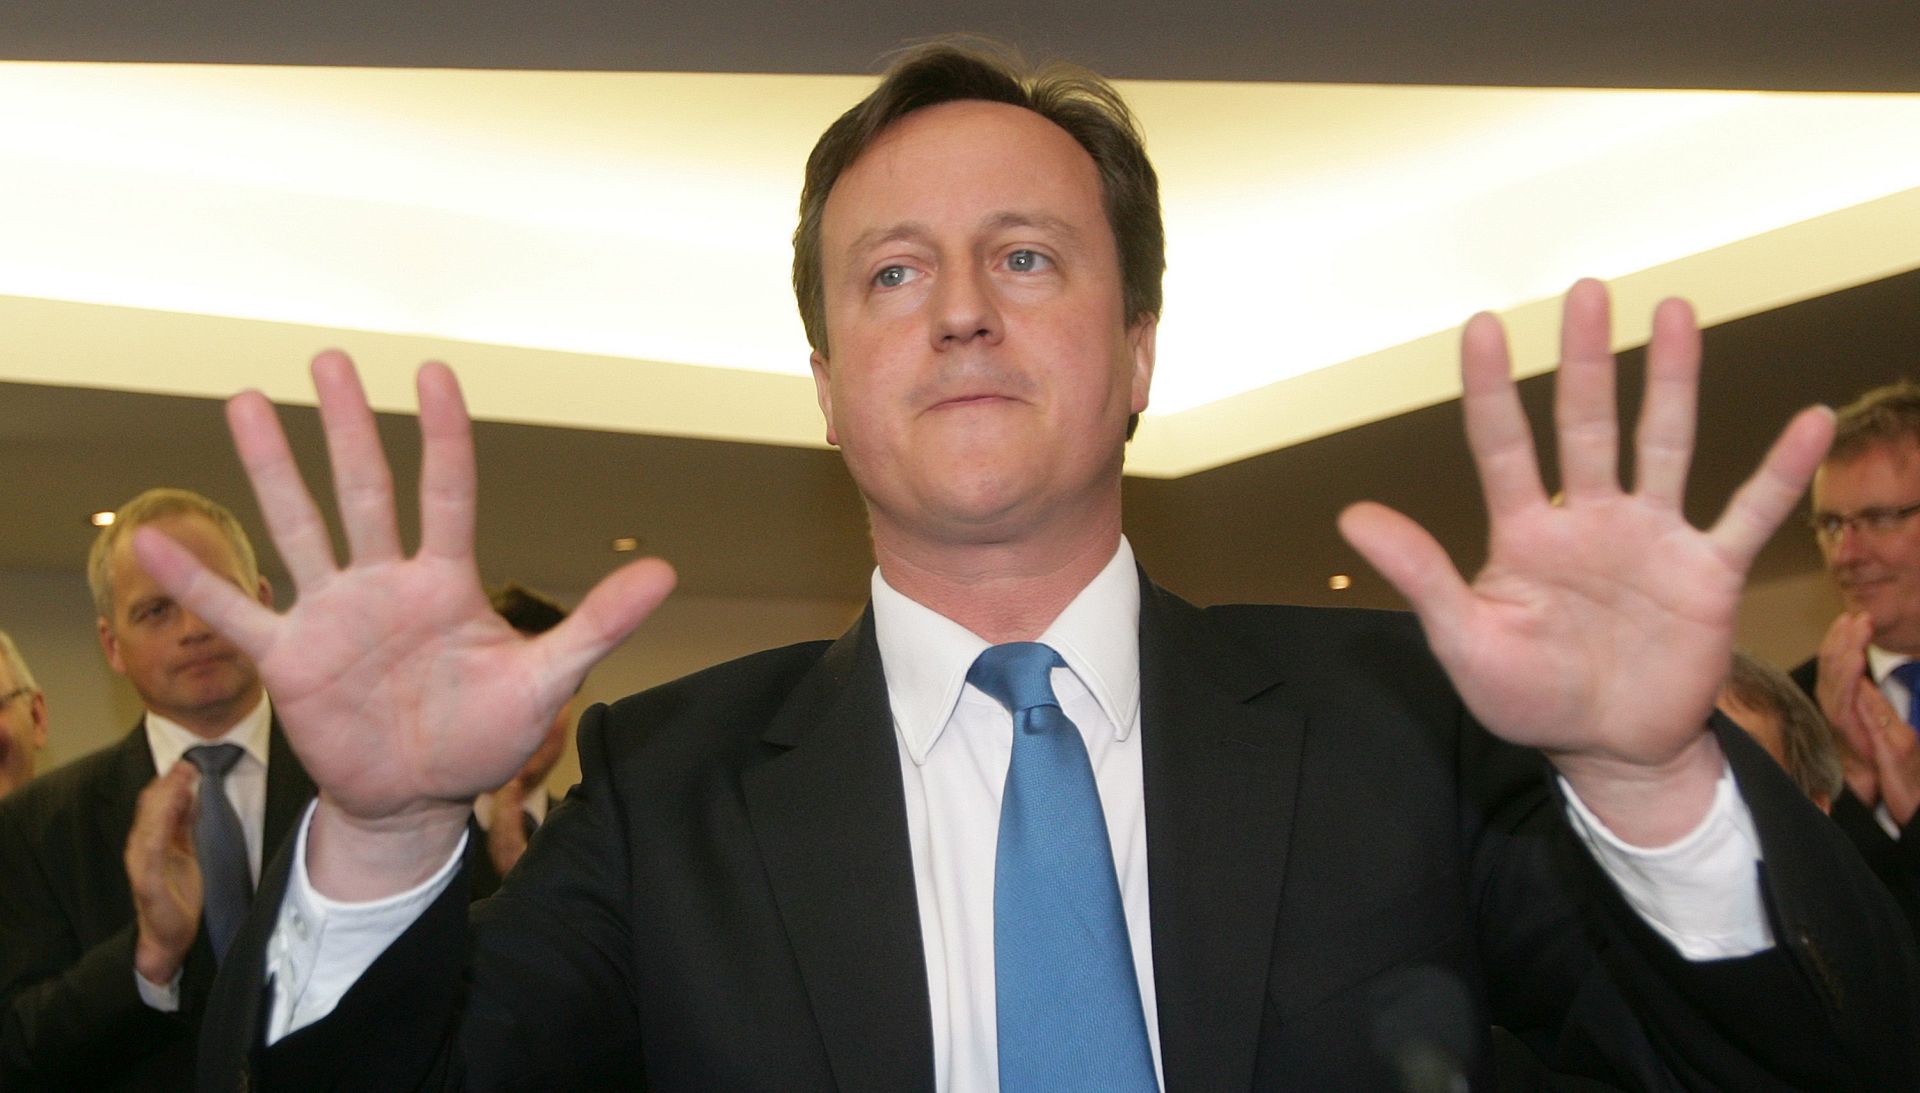 epa05536666 (FILE) A file picture dated 04 May 2010 shows then British Conservative Party leader David Cameron gestures at La Mon House Hotel in east Belfast, Northern Ireland, Britain. According to reports from  12 September 2016, Cameron is to resign as Member of Parliament (MP) before the next general election.  EPA/PAUL MCERLANE